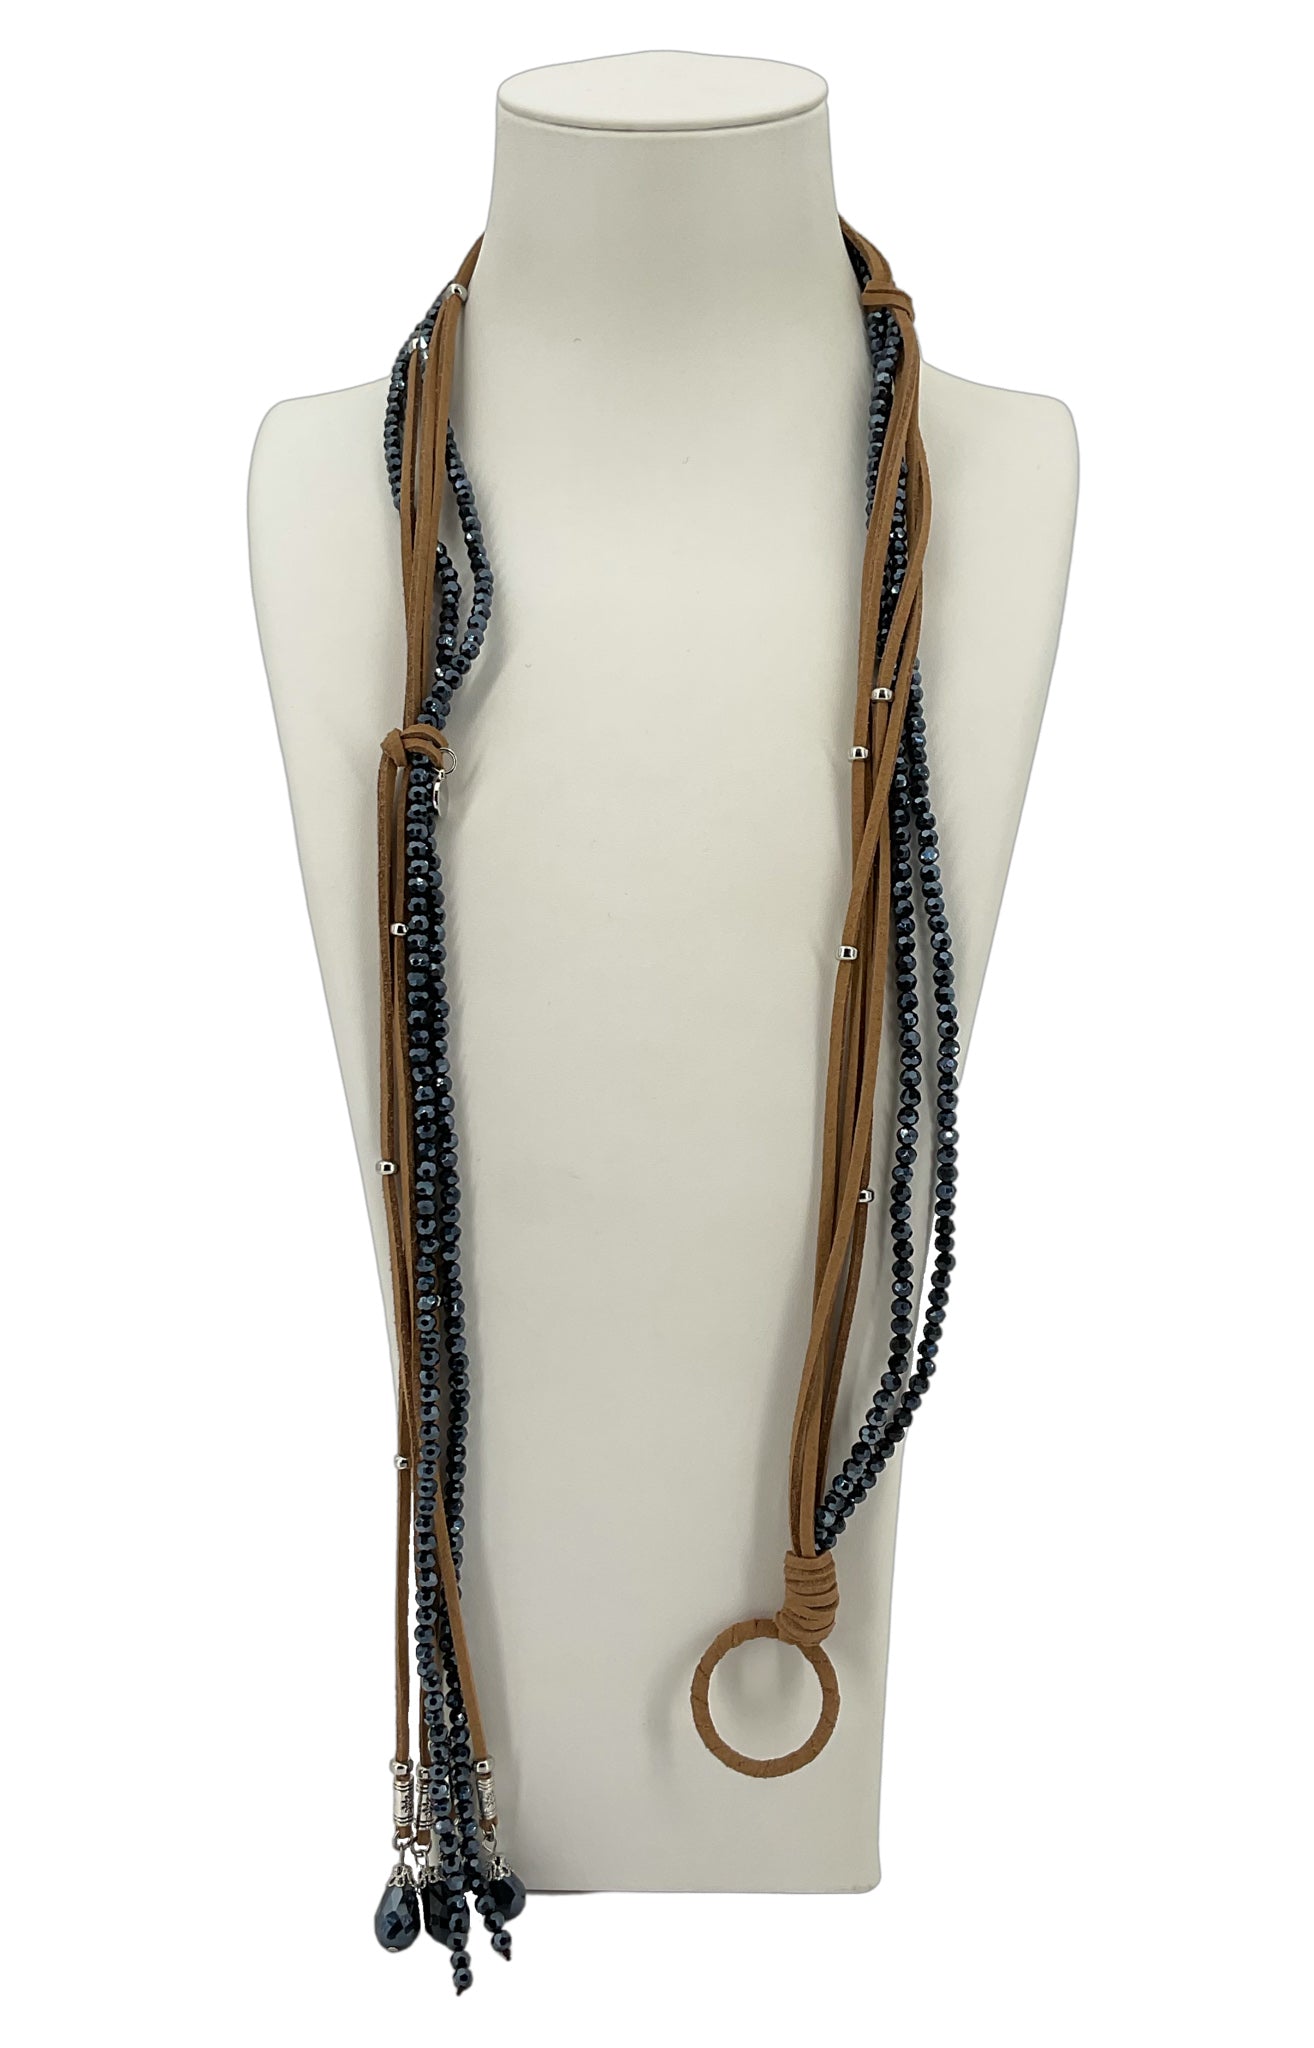 CHICO'S FAUX LEATHER AND BEADS WRAP NECKLACE